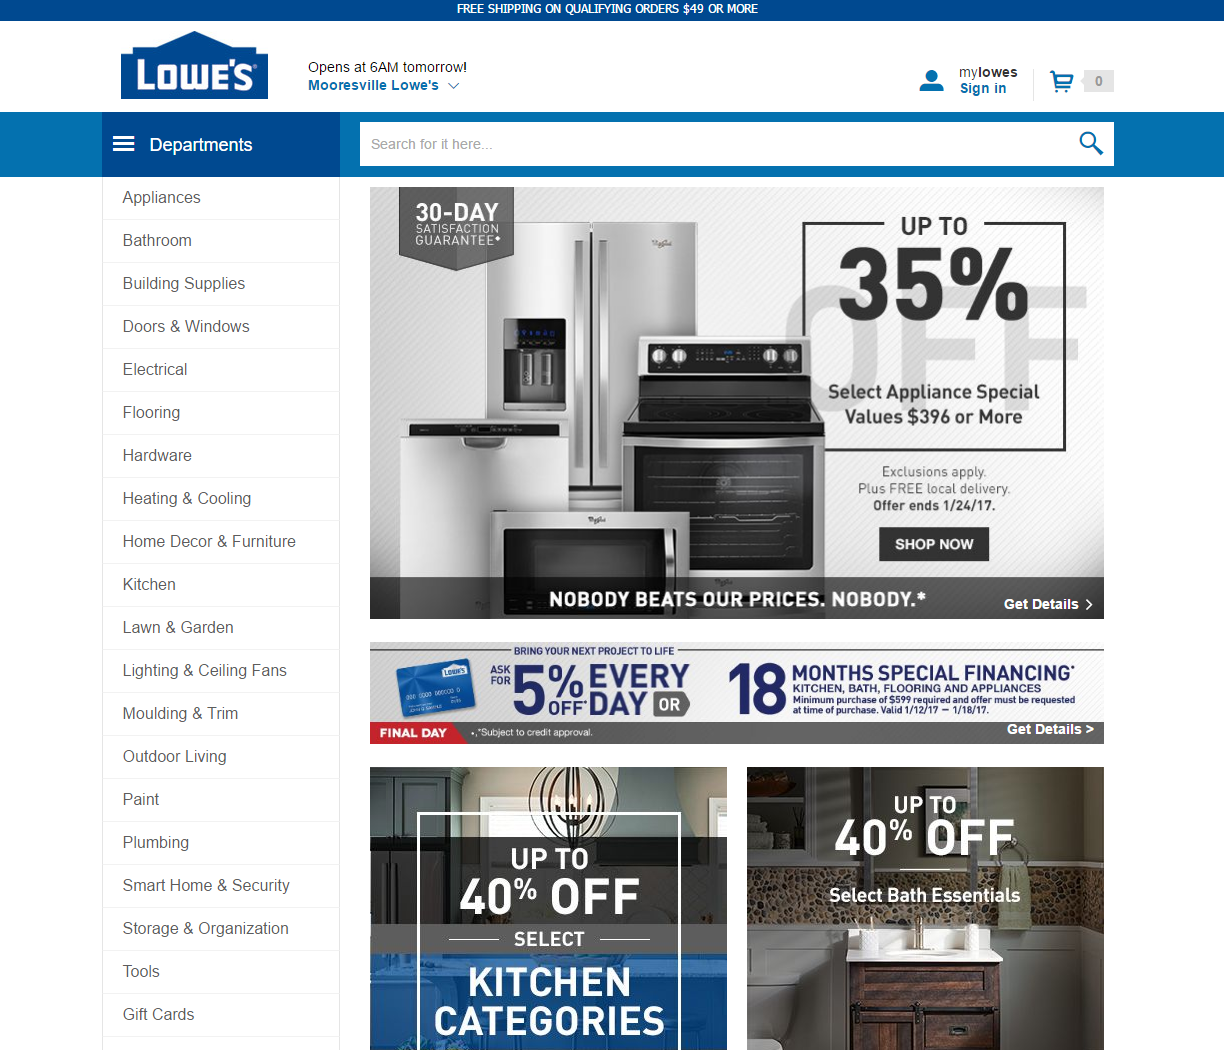 Lowes 2015 Redesign